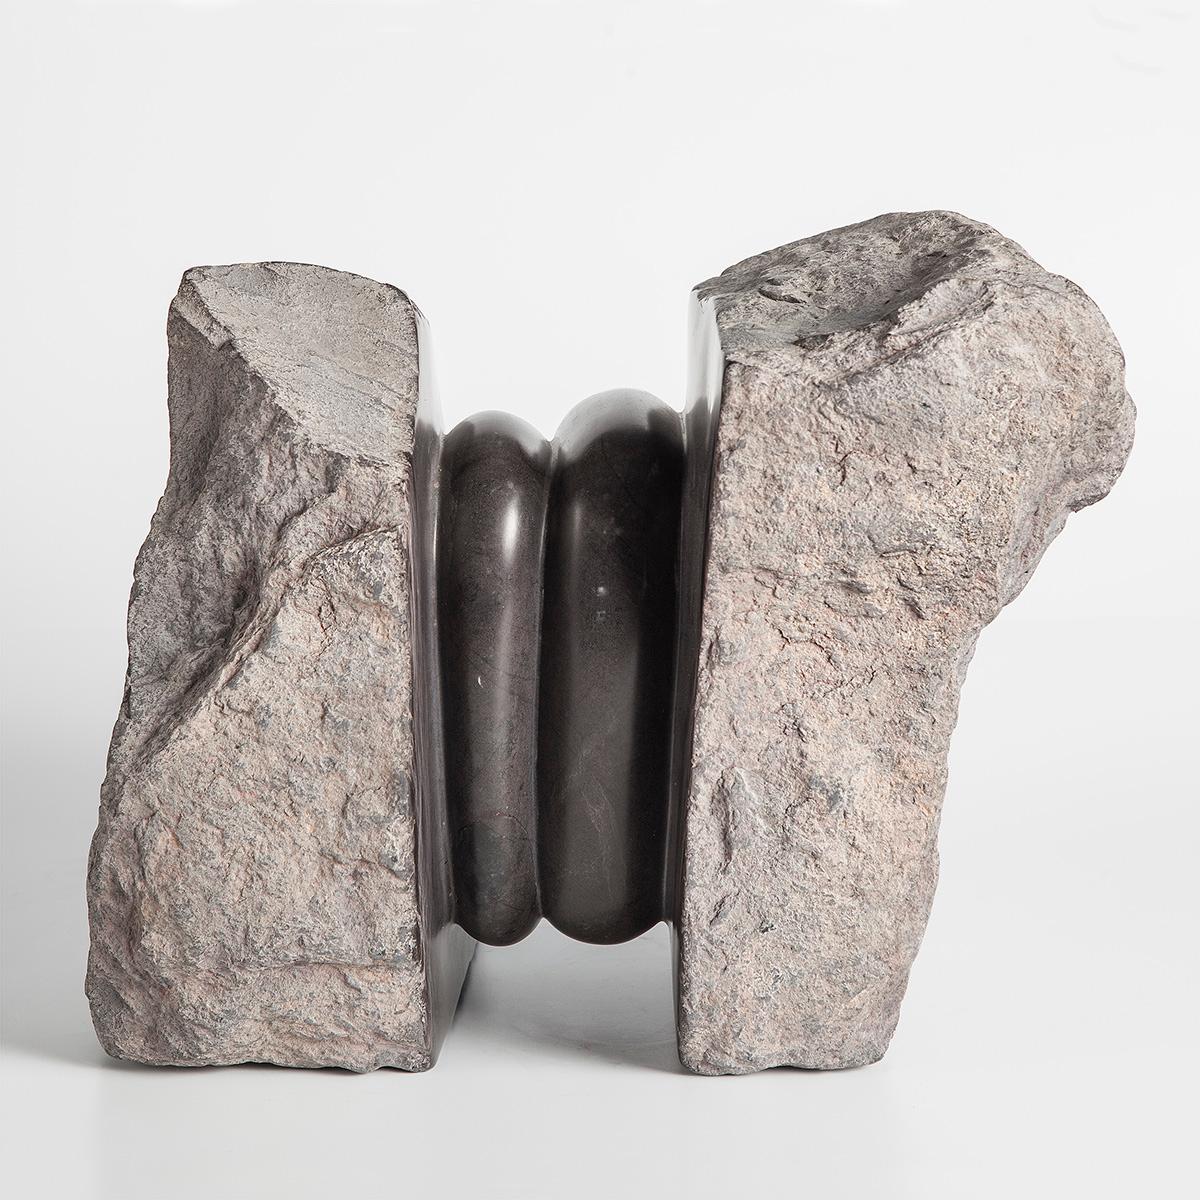 Ricard Casabayó is a Spanish sculptor with a extensive artistic career, whose work
reveals the emotions and sensations hidden in natural materials such as marble and
stone. The visible and the invisible of nature are manifested in his